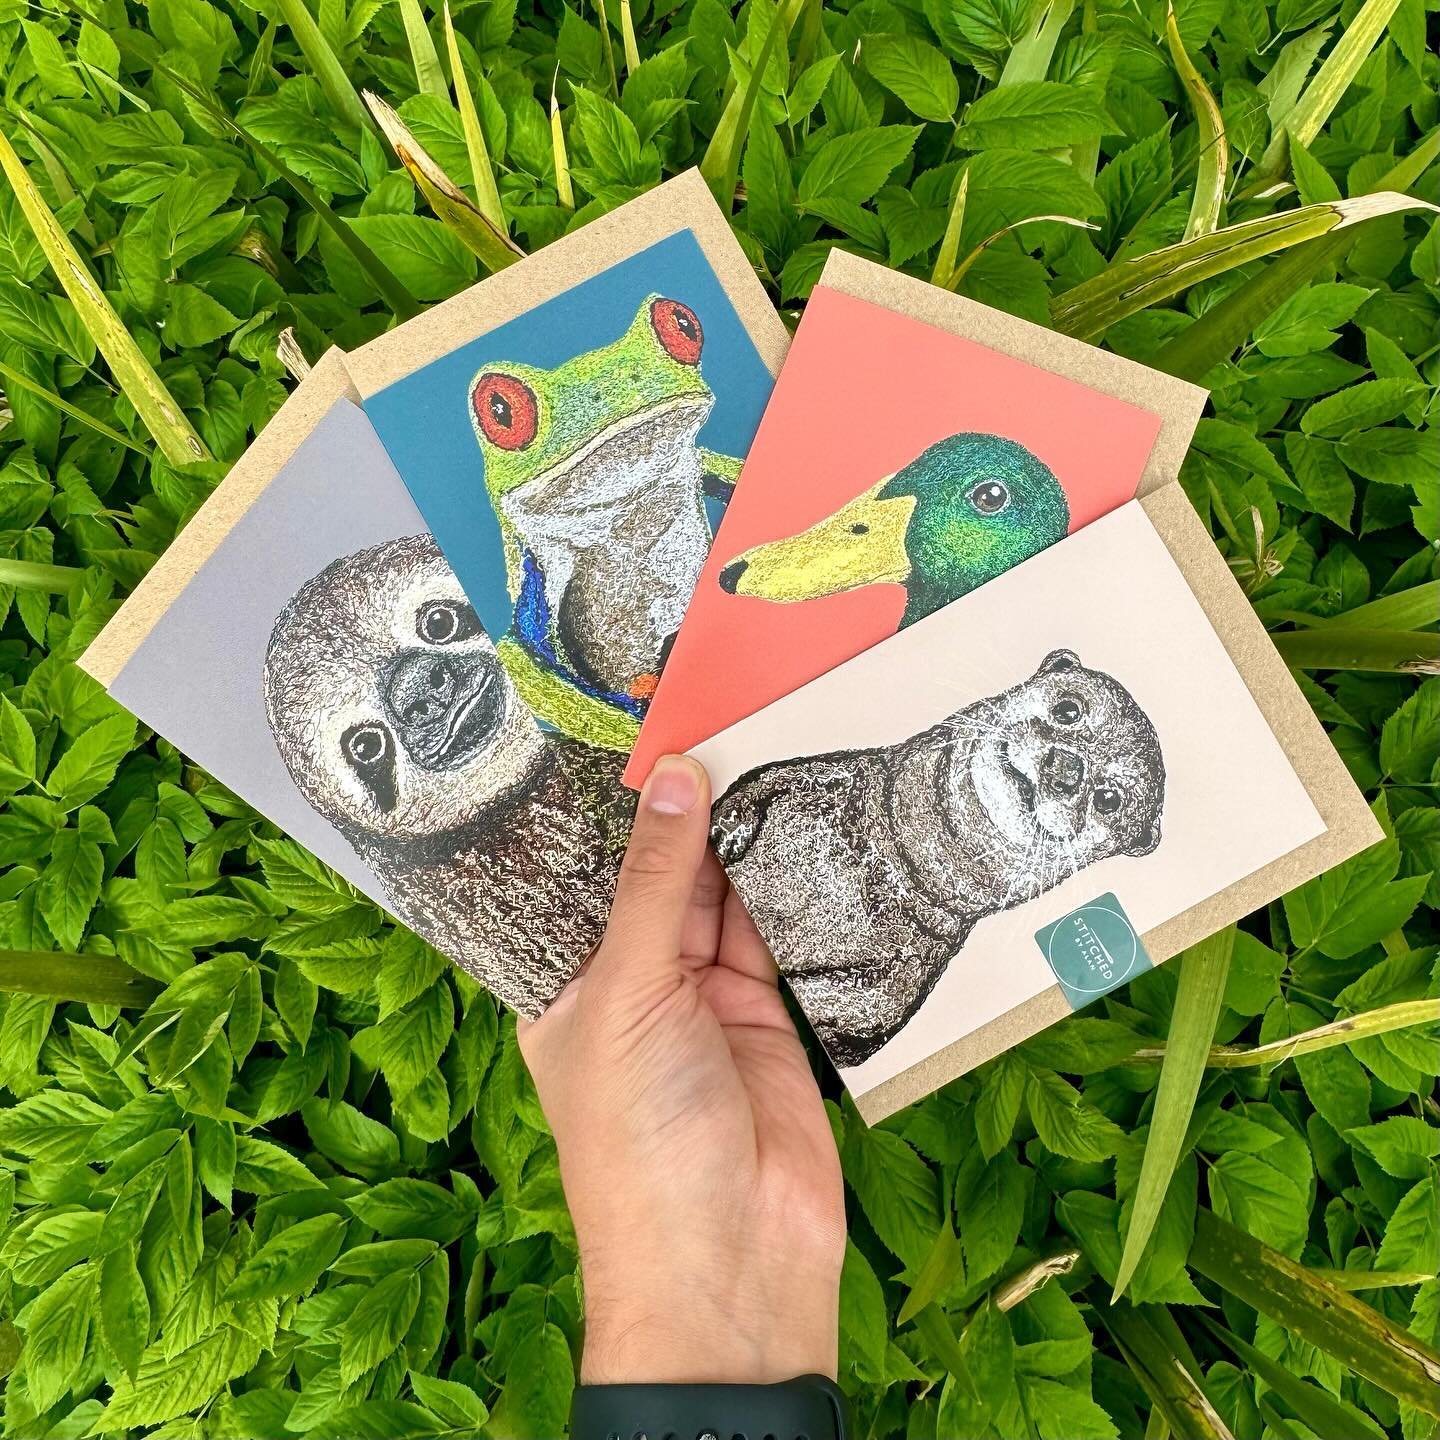 Introducing 4 new embroidered animal greeting cards! 🦥🐸🦆🦦

Who is your favourite!? 

Now available on my website and I&rsquo;ll be bringing these with me to Ay-Up Market this weekend! @itsinnottingham 💕

You can now also buy multiple cards for a